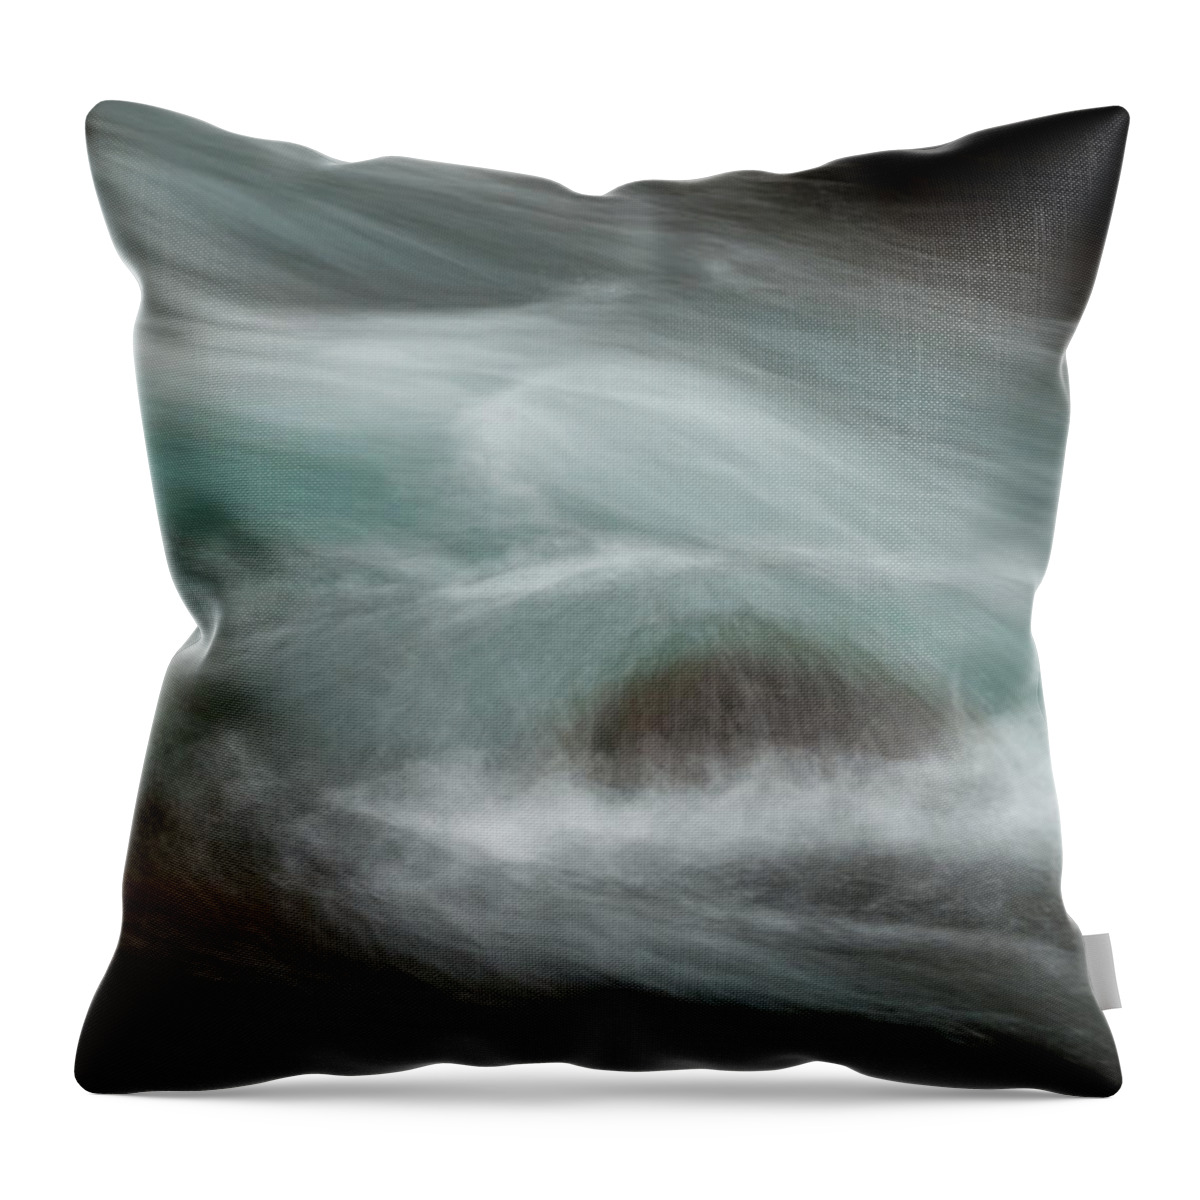 Rushing River Throw Pillow featuring the photograph Rushing River by Jean Noren